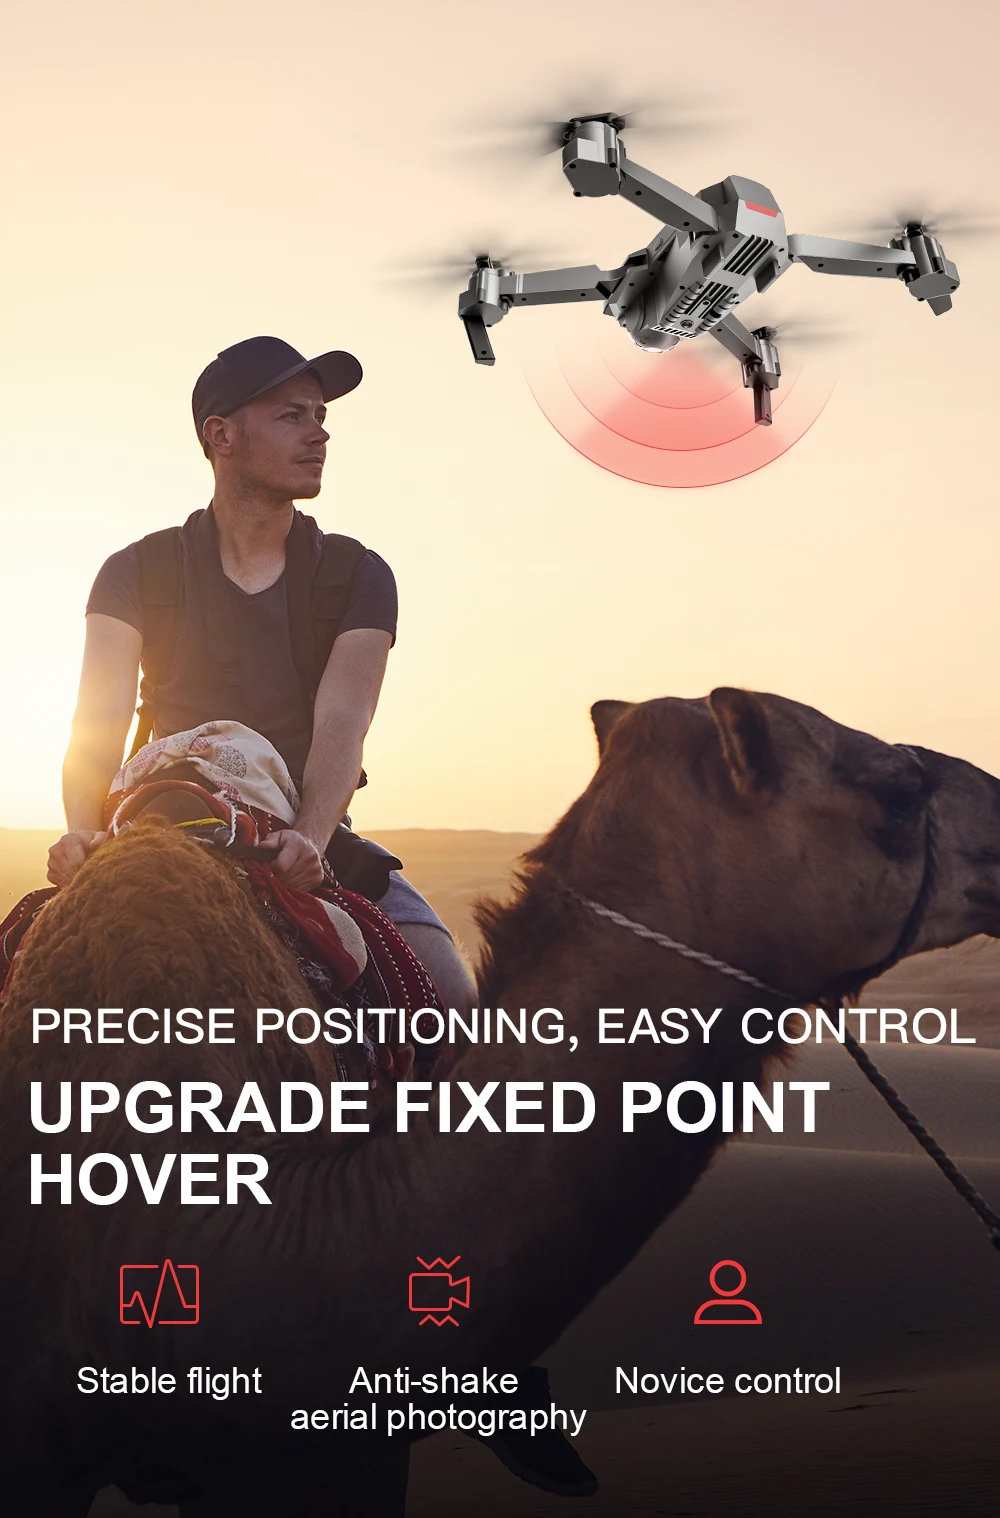 SG907 GPS Drone with 4K HD Adjustment Dual Camera Wide Angle 5G WIFI FPV RC Quadcopter Professional Foldable Drones